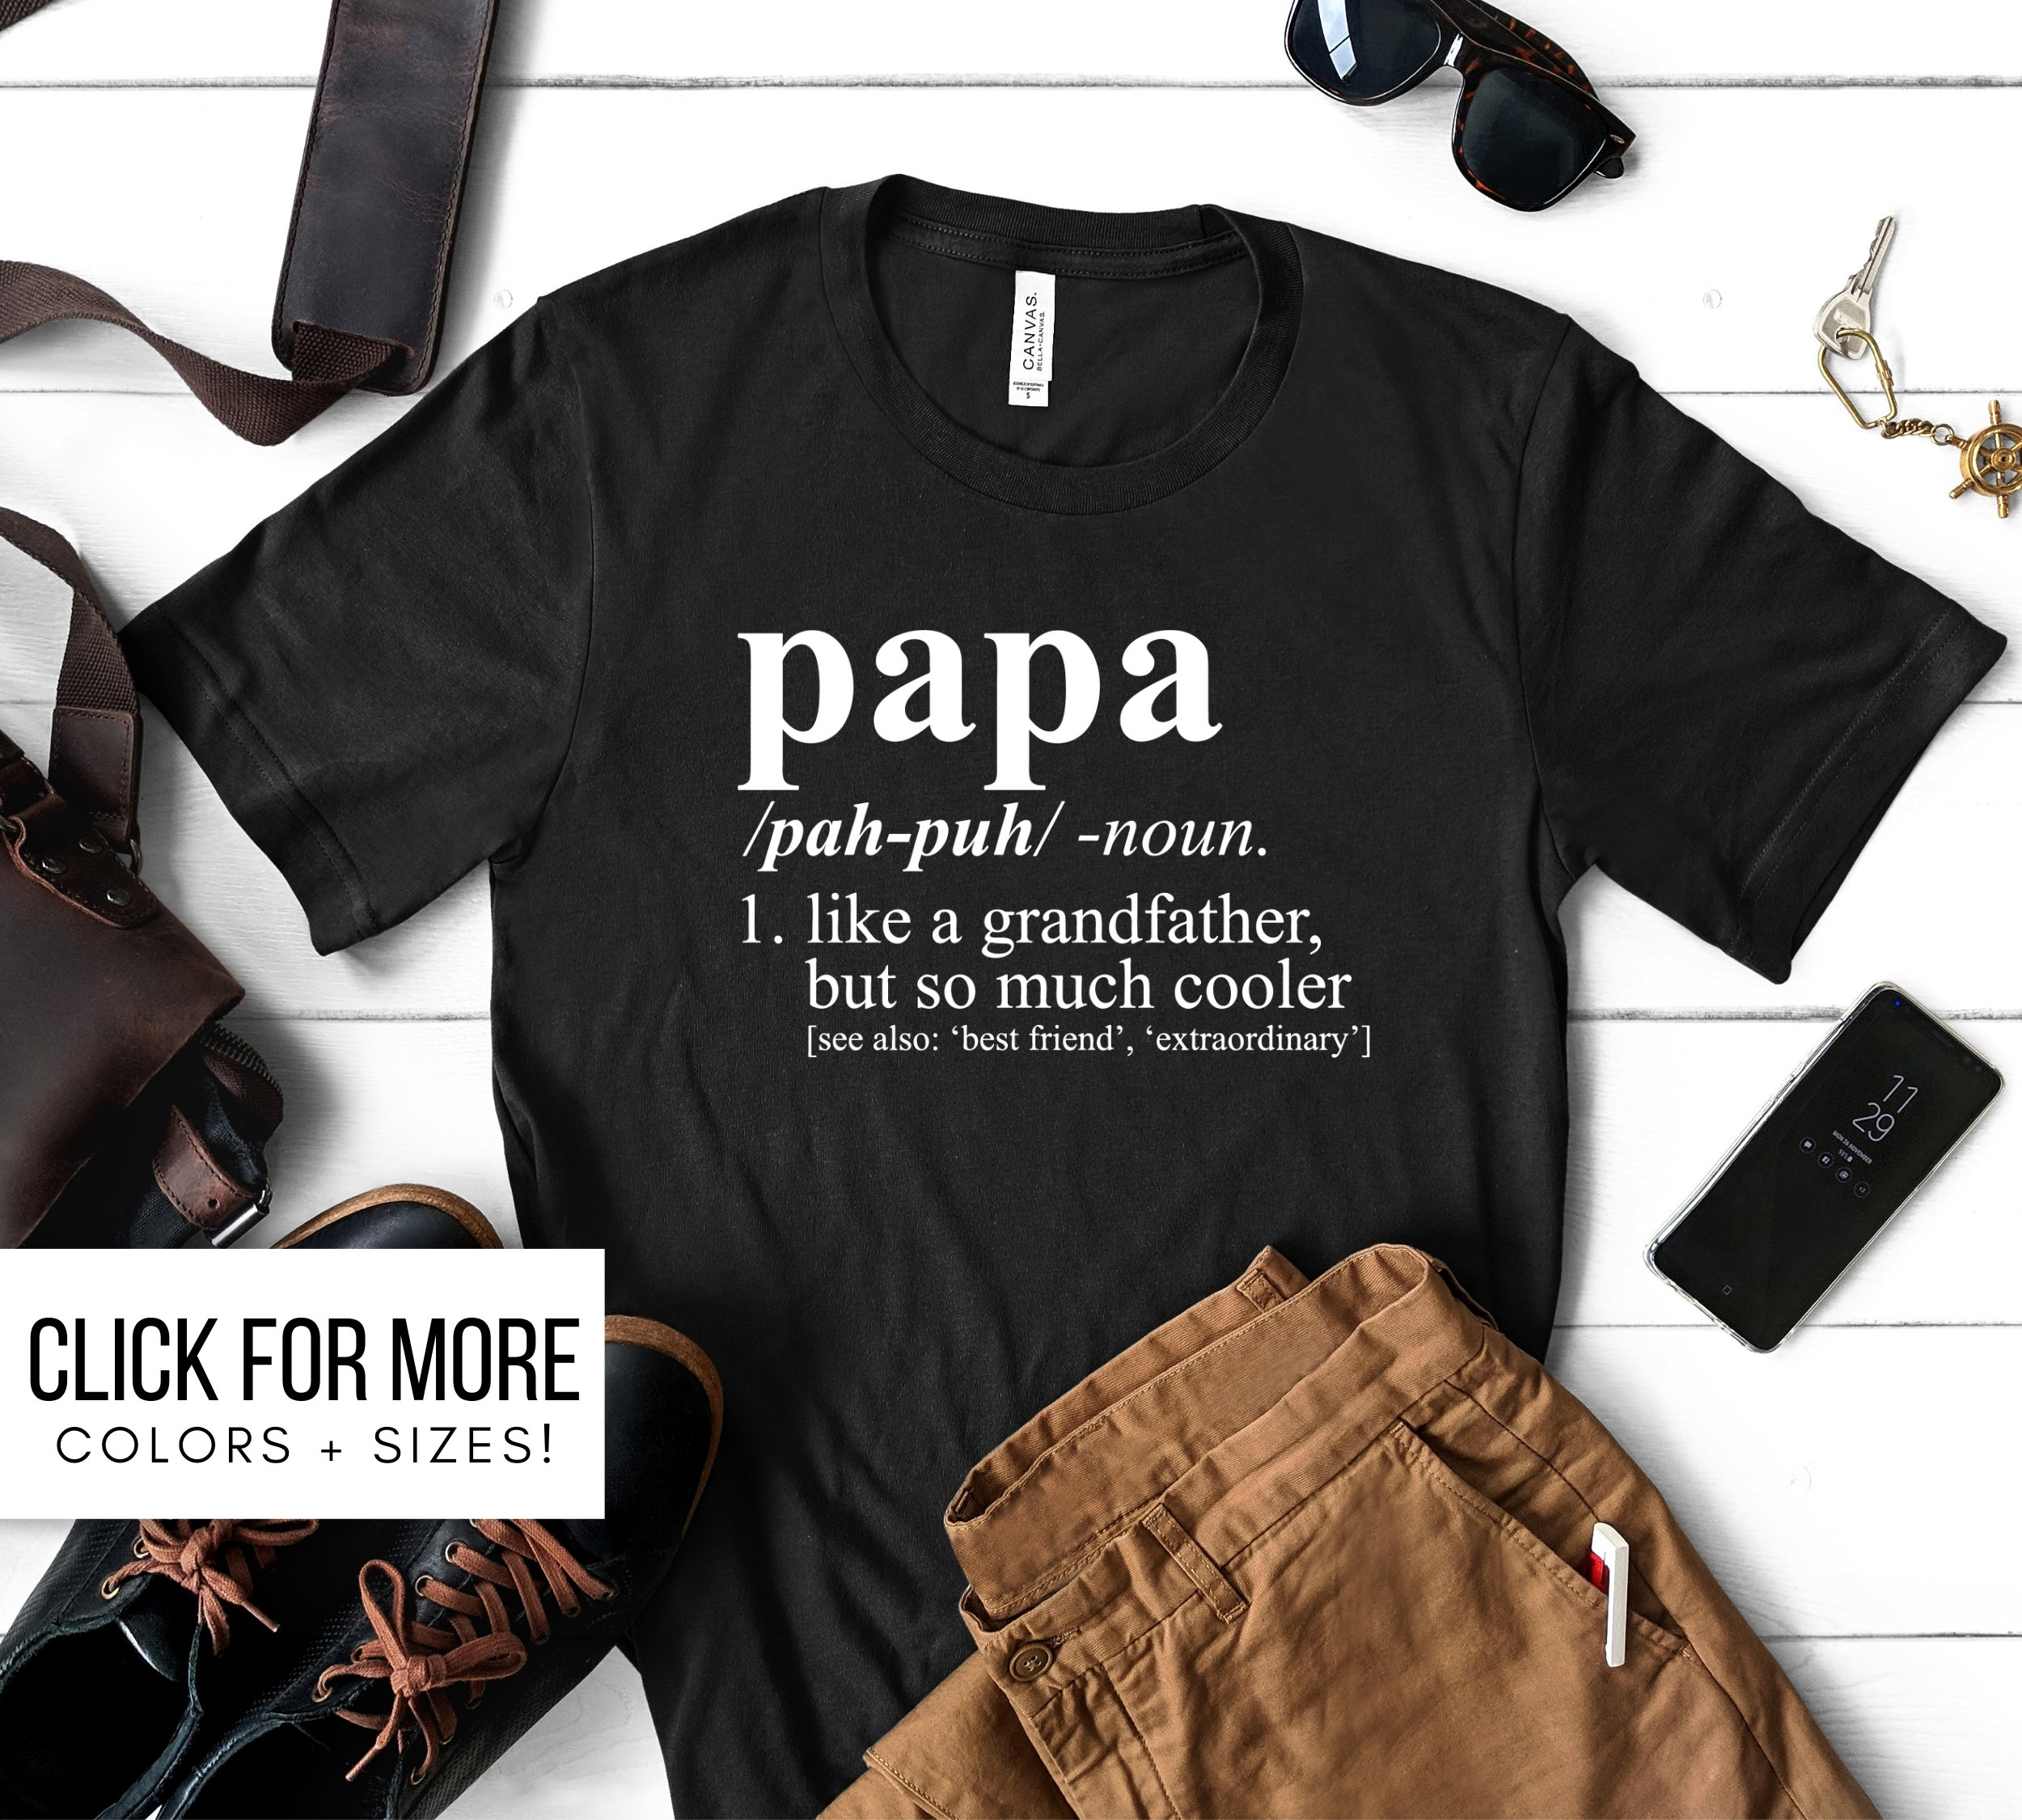 fathers day quarantine 2020 gift for dad Father's day shirt quarantine shirt father's day gift social distancing shirt funny dad shirt